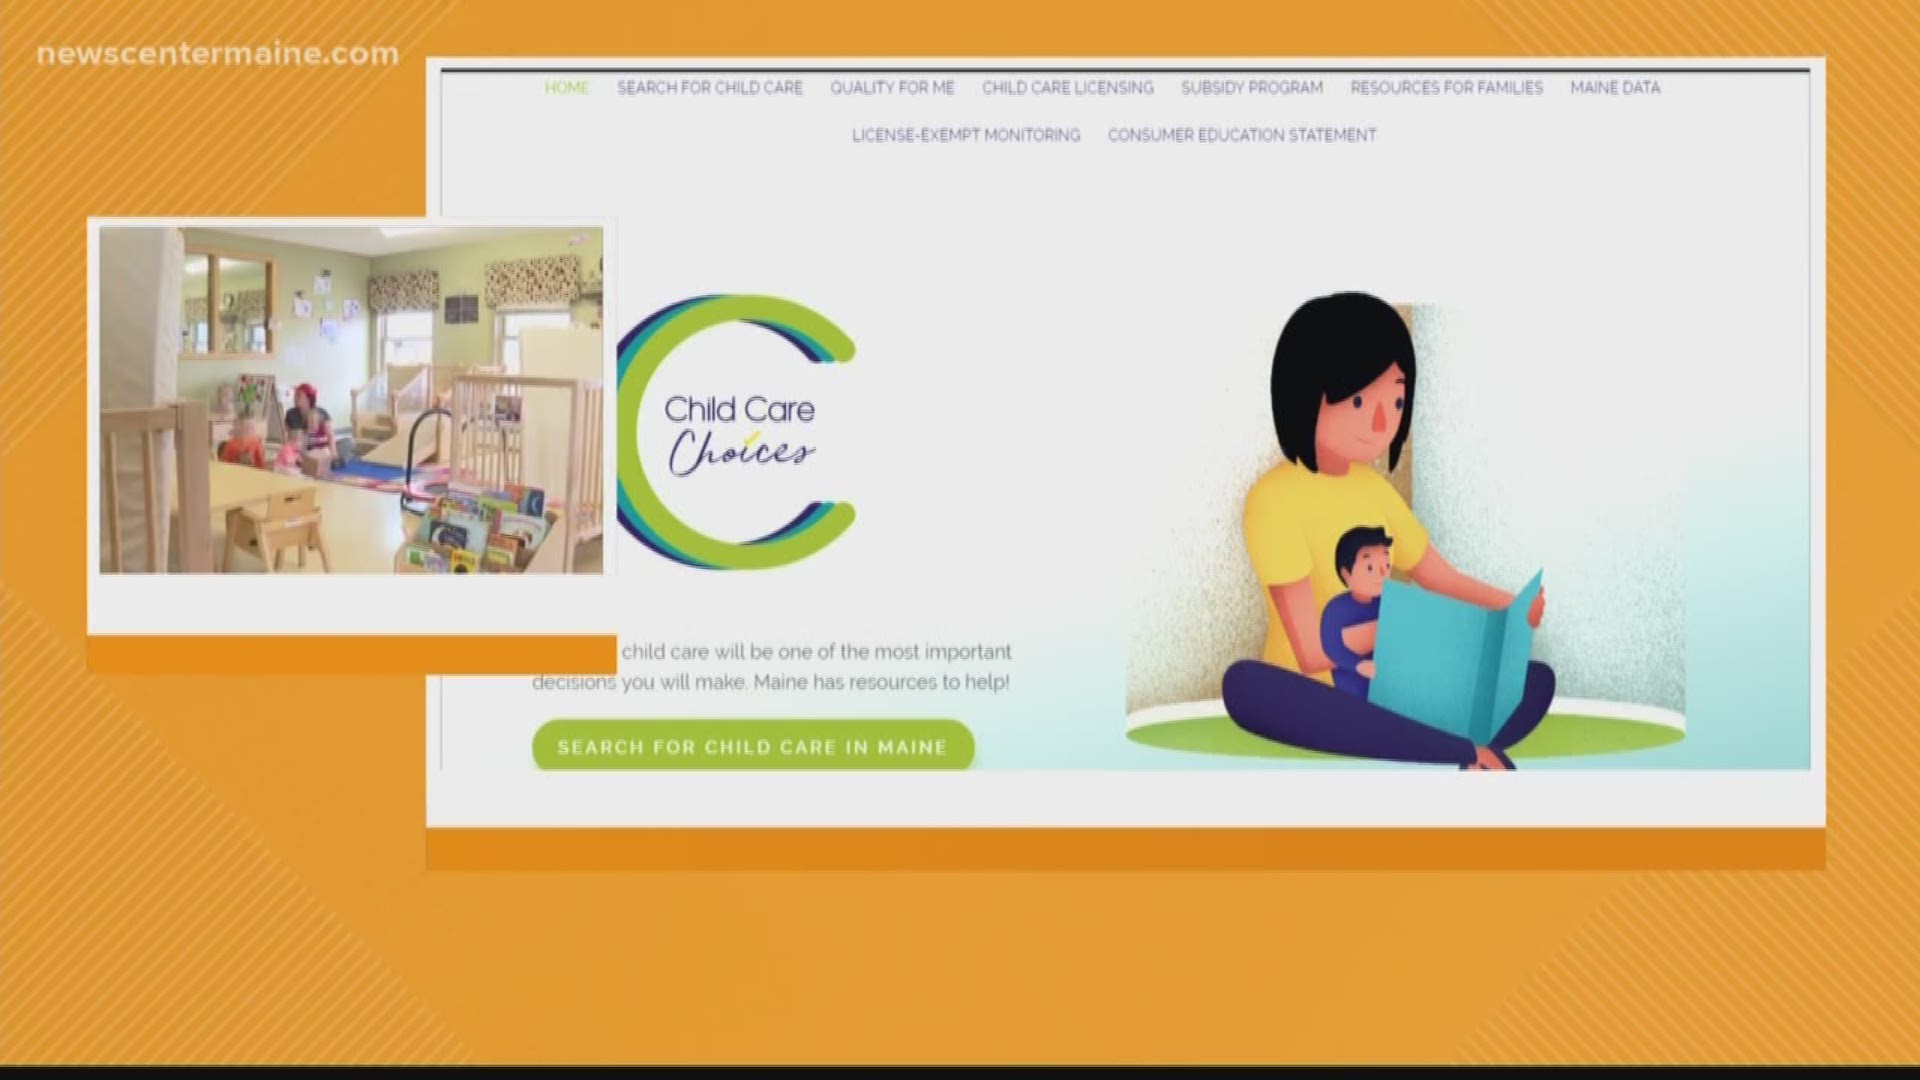 Maine's DHHS wants to send more parents to a website to help find childcare options.